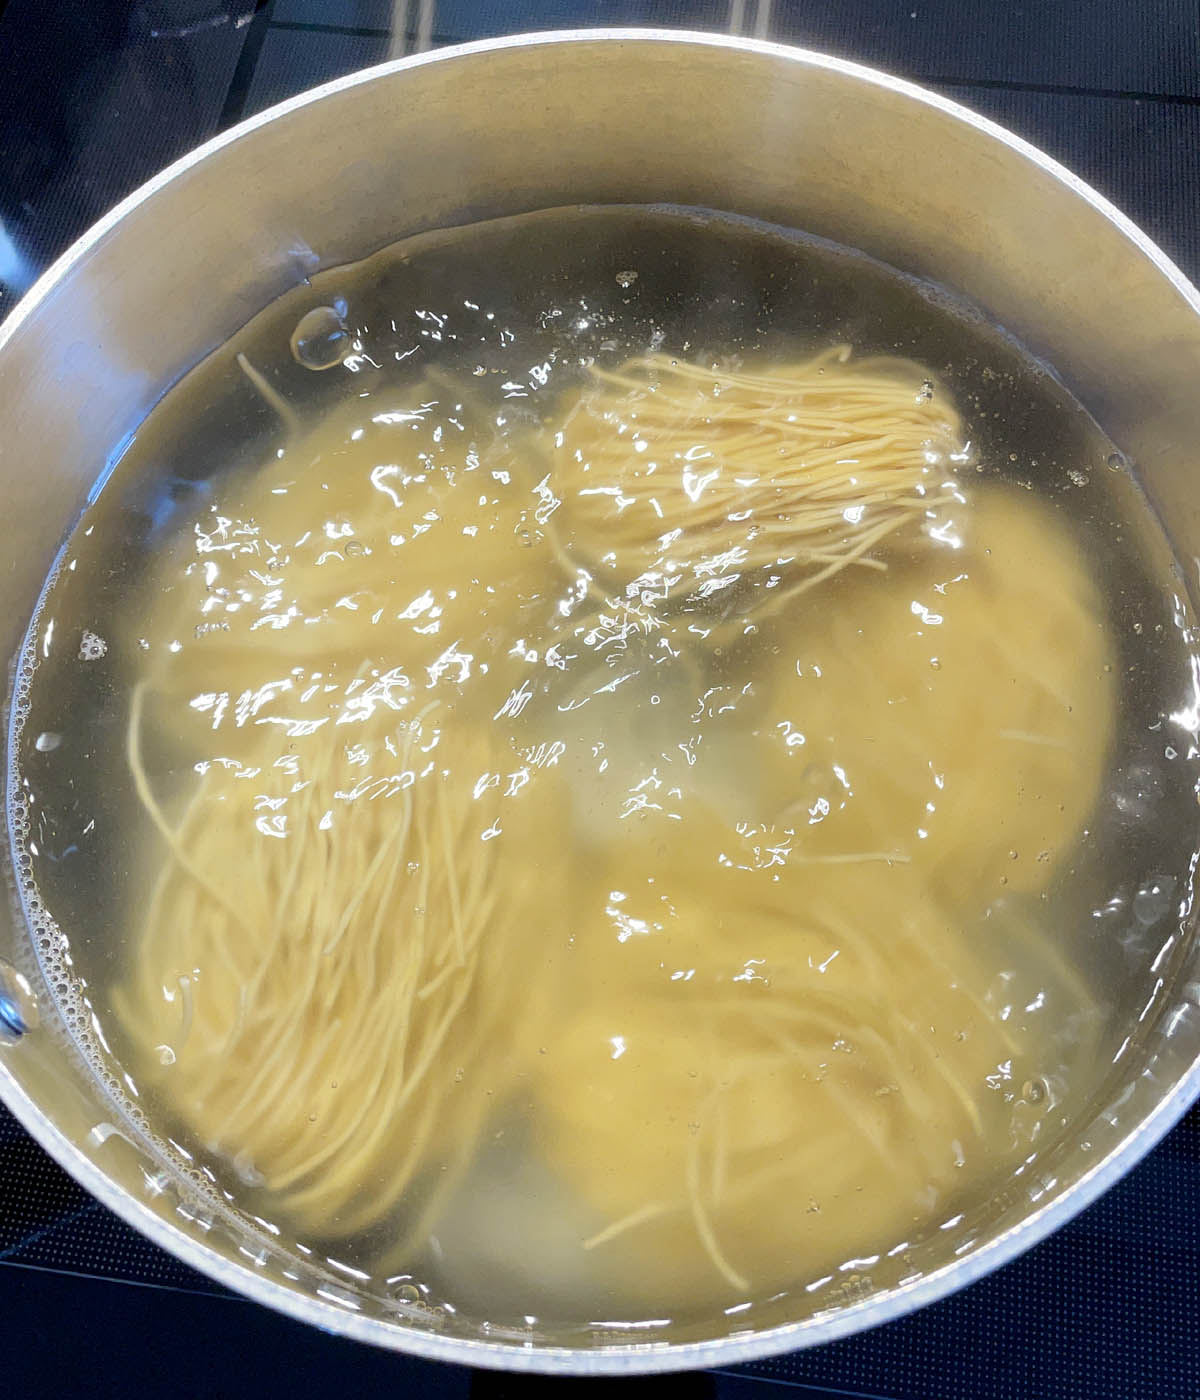 Five bundles of dried noodles in a pot of boiling water.